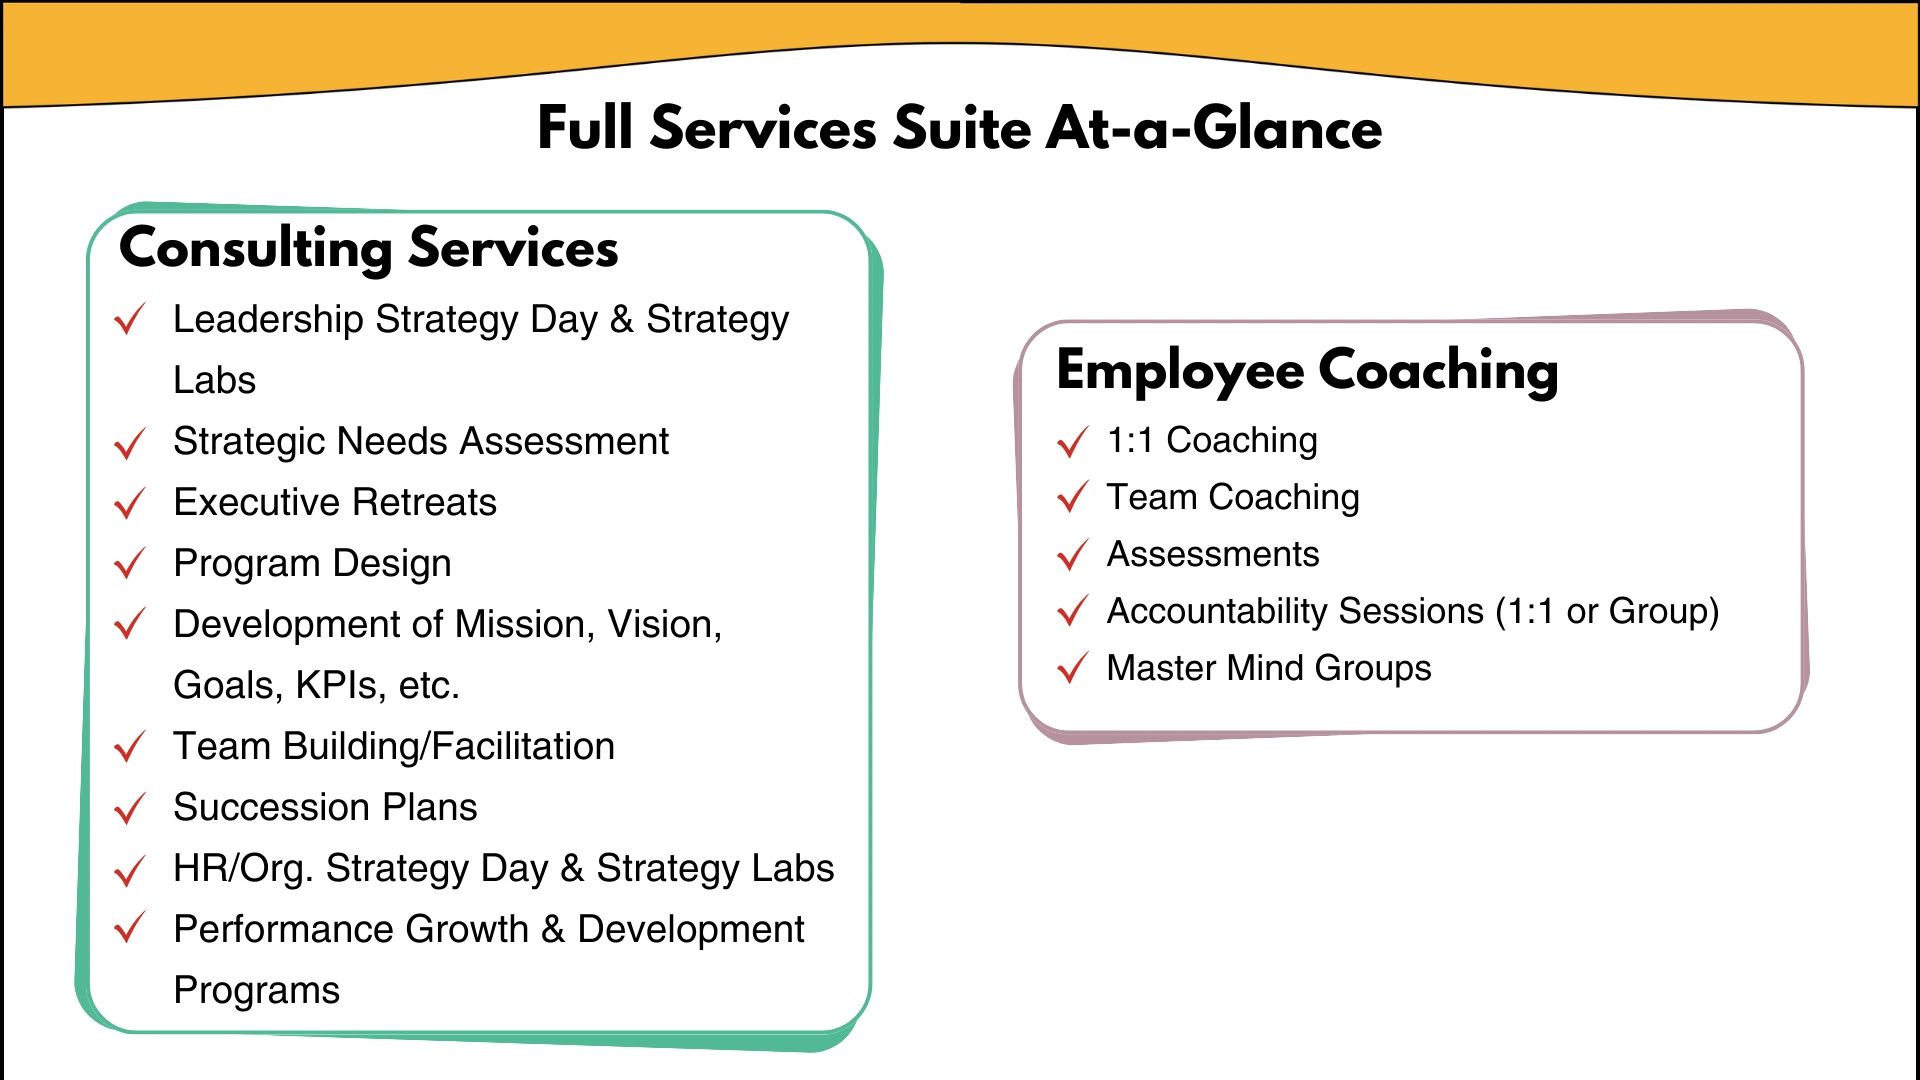 Consulting services
Coaching
Strategy
Leadership Skills
Needs Assessment
Mission Vision
Assessments